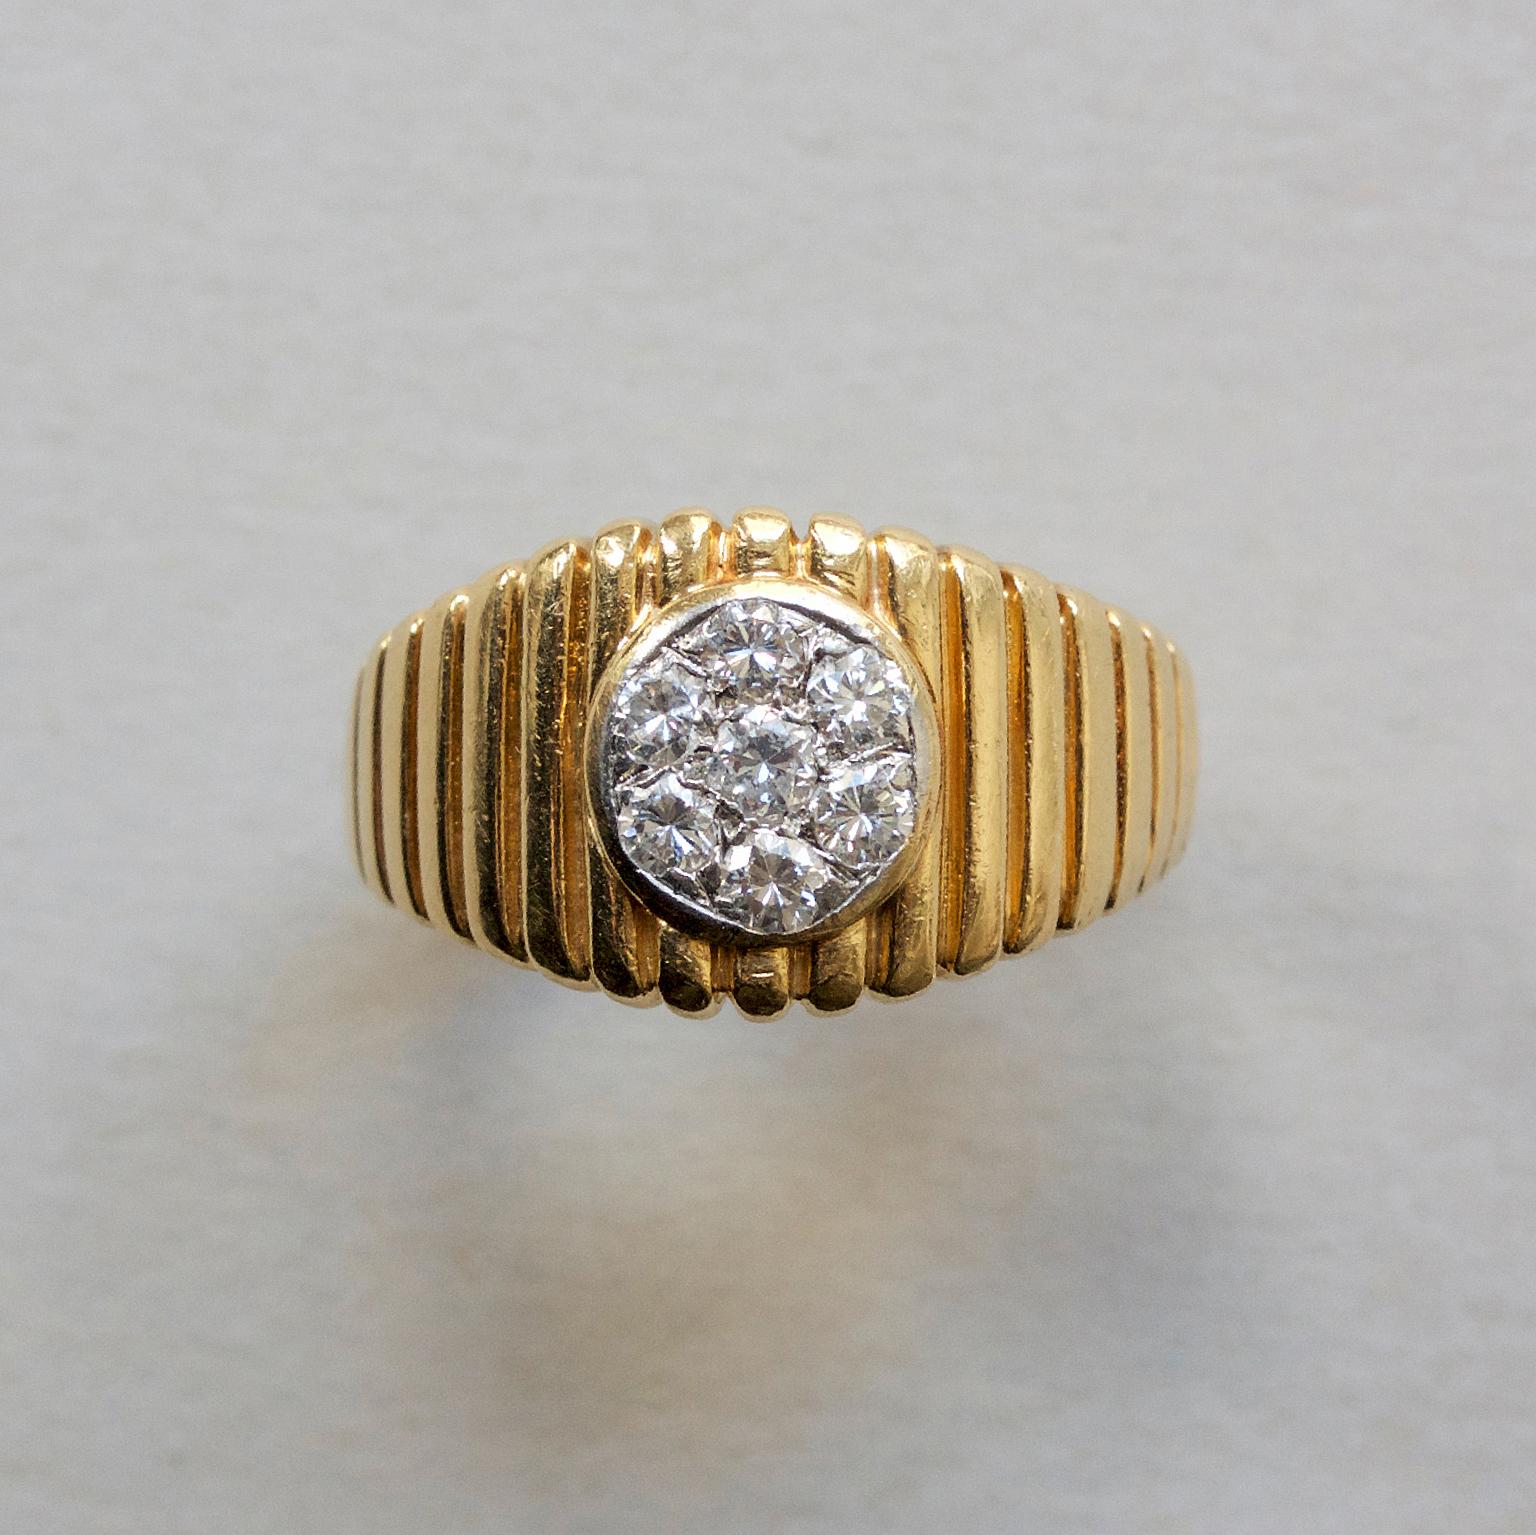 An 18 carat gold ring set with zeven round, brilliant cut diamonds. The shank is ribbed and the diamonds are set in a circle with one stone in the middle and the others in a circle around it. (app. 0.20 carats in total), signed and numbered: VCA @